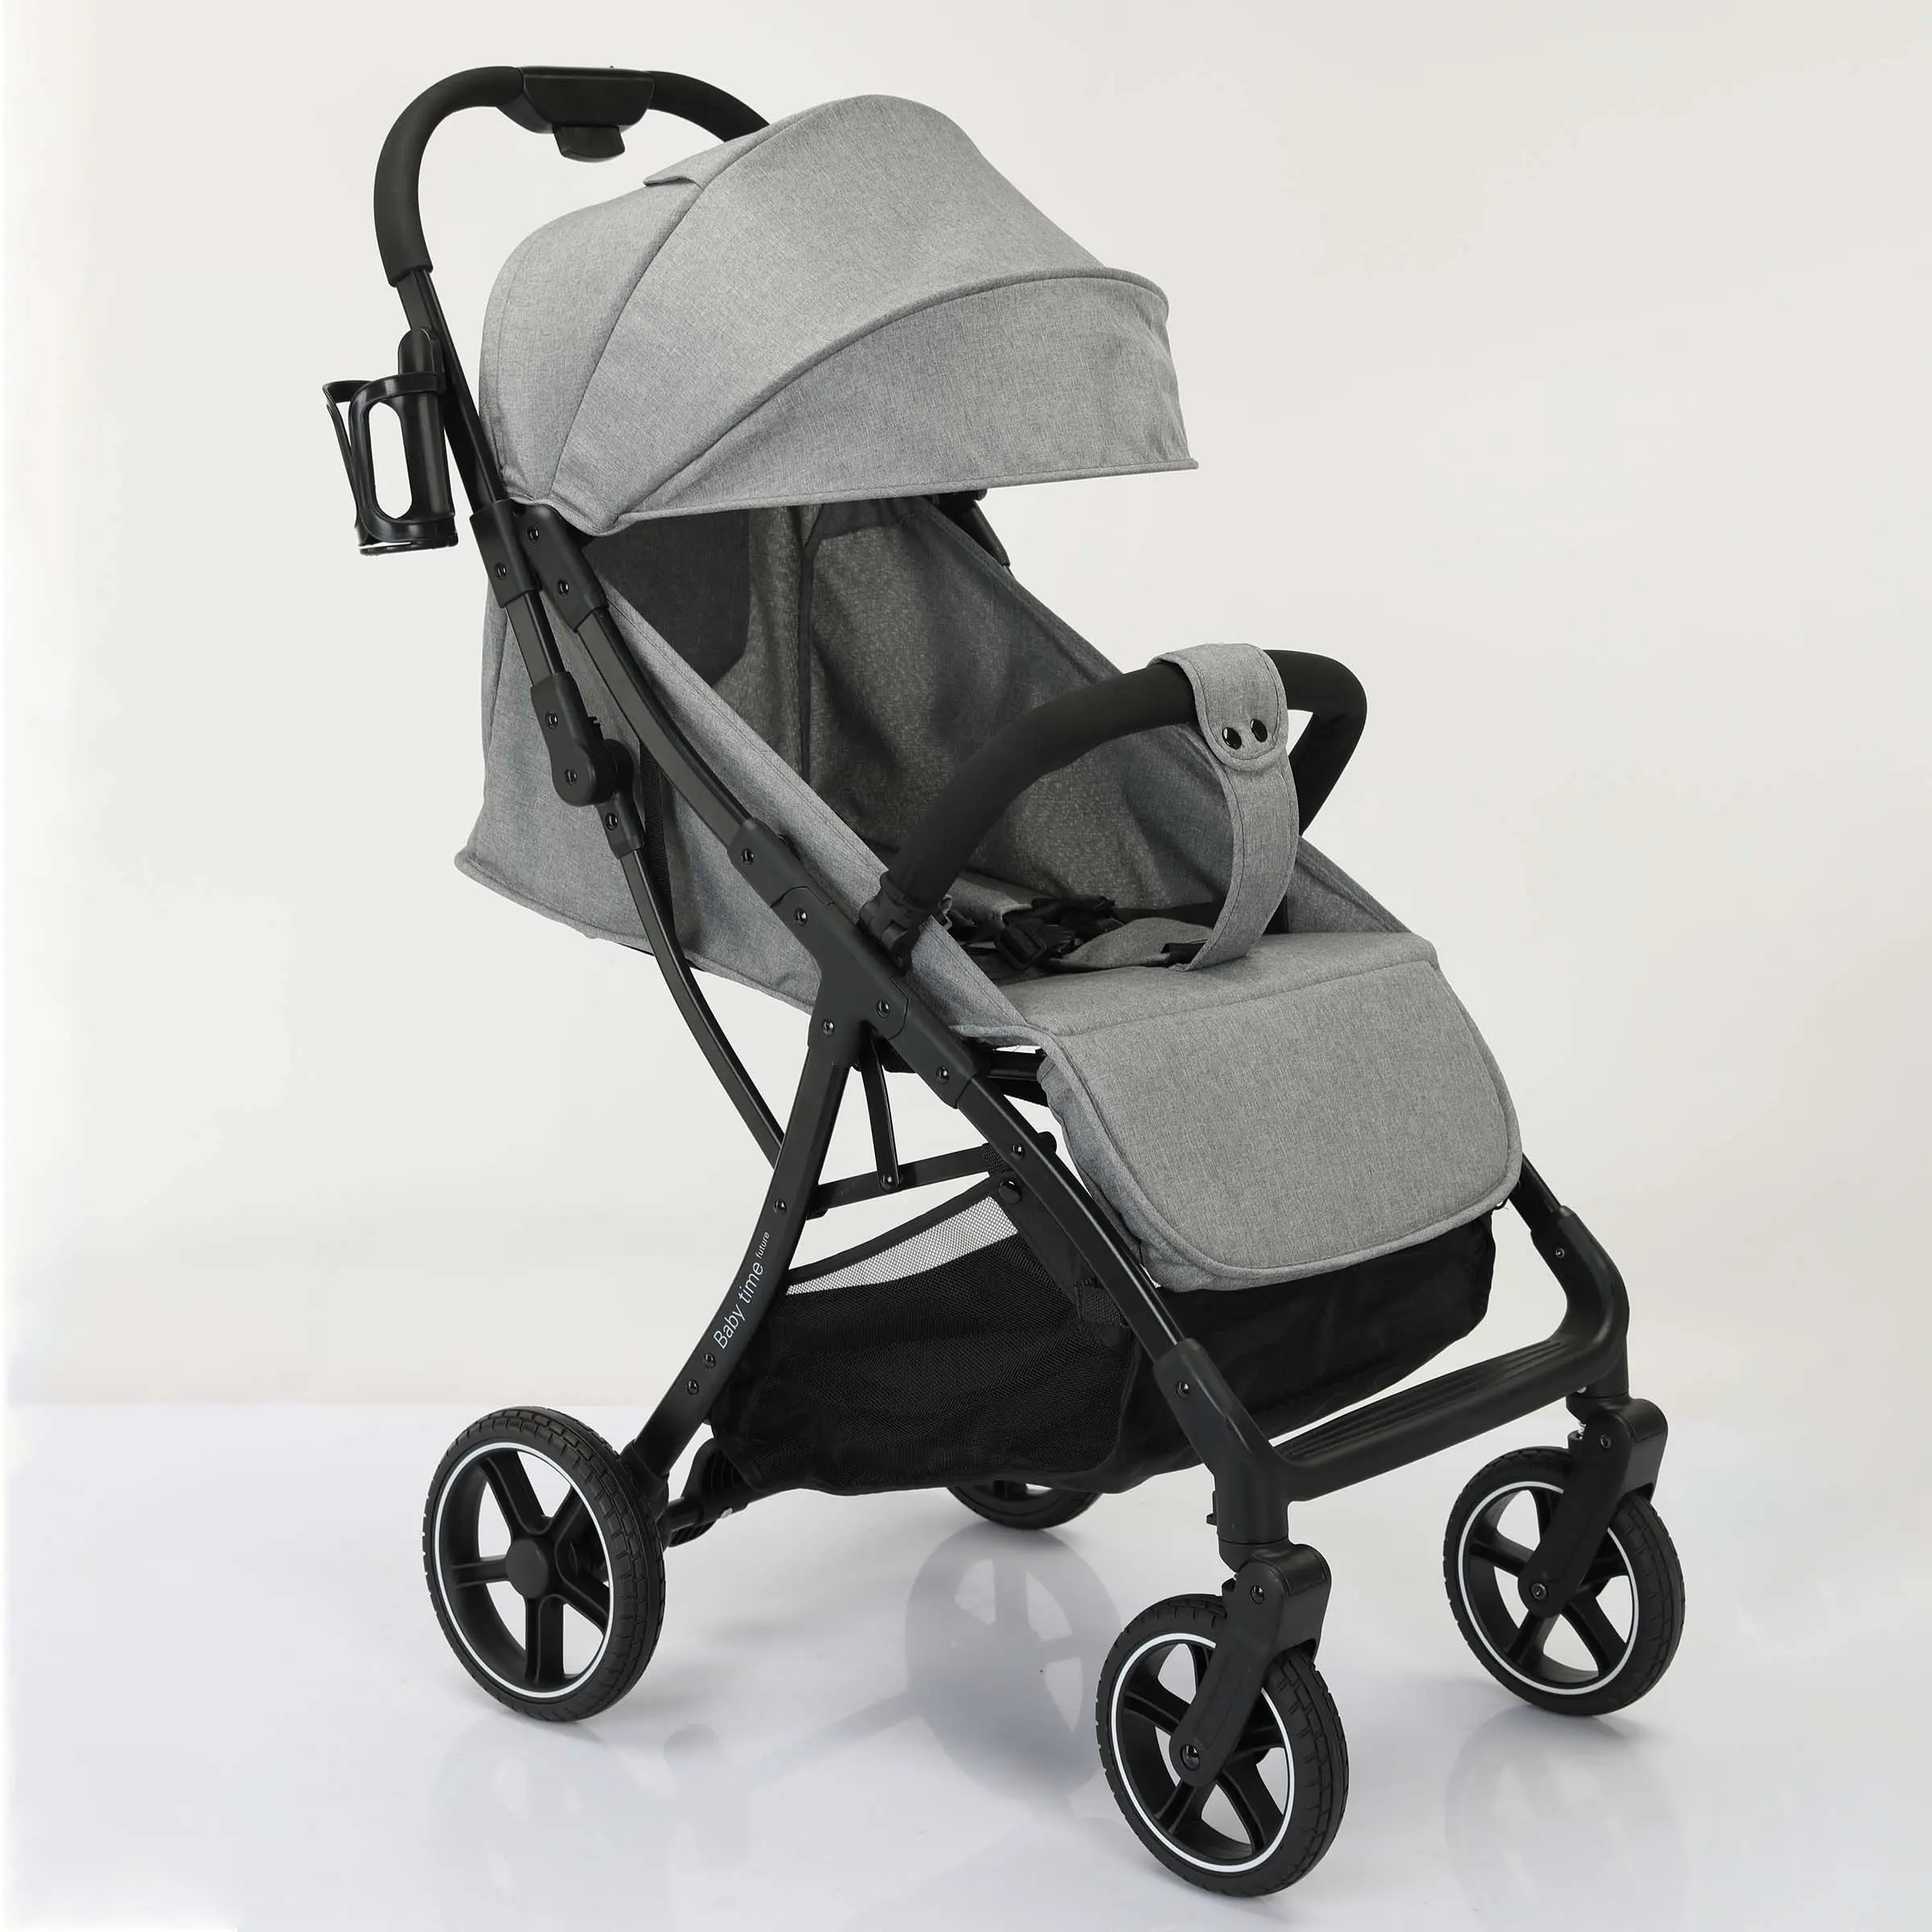 OEM Factory Price Lightweight Baby Stroller One-Hand Operation EVA Wheels for 6 Months to 3 Years Old Hot Sale Pram